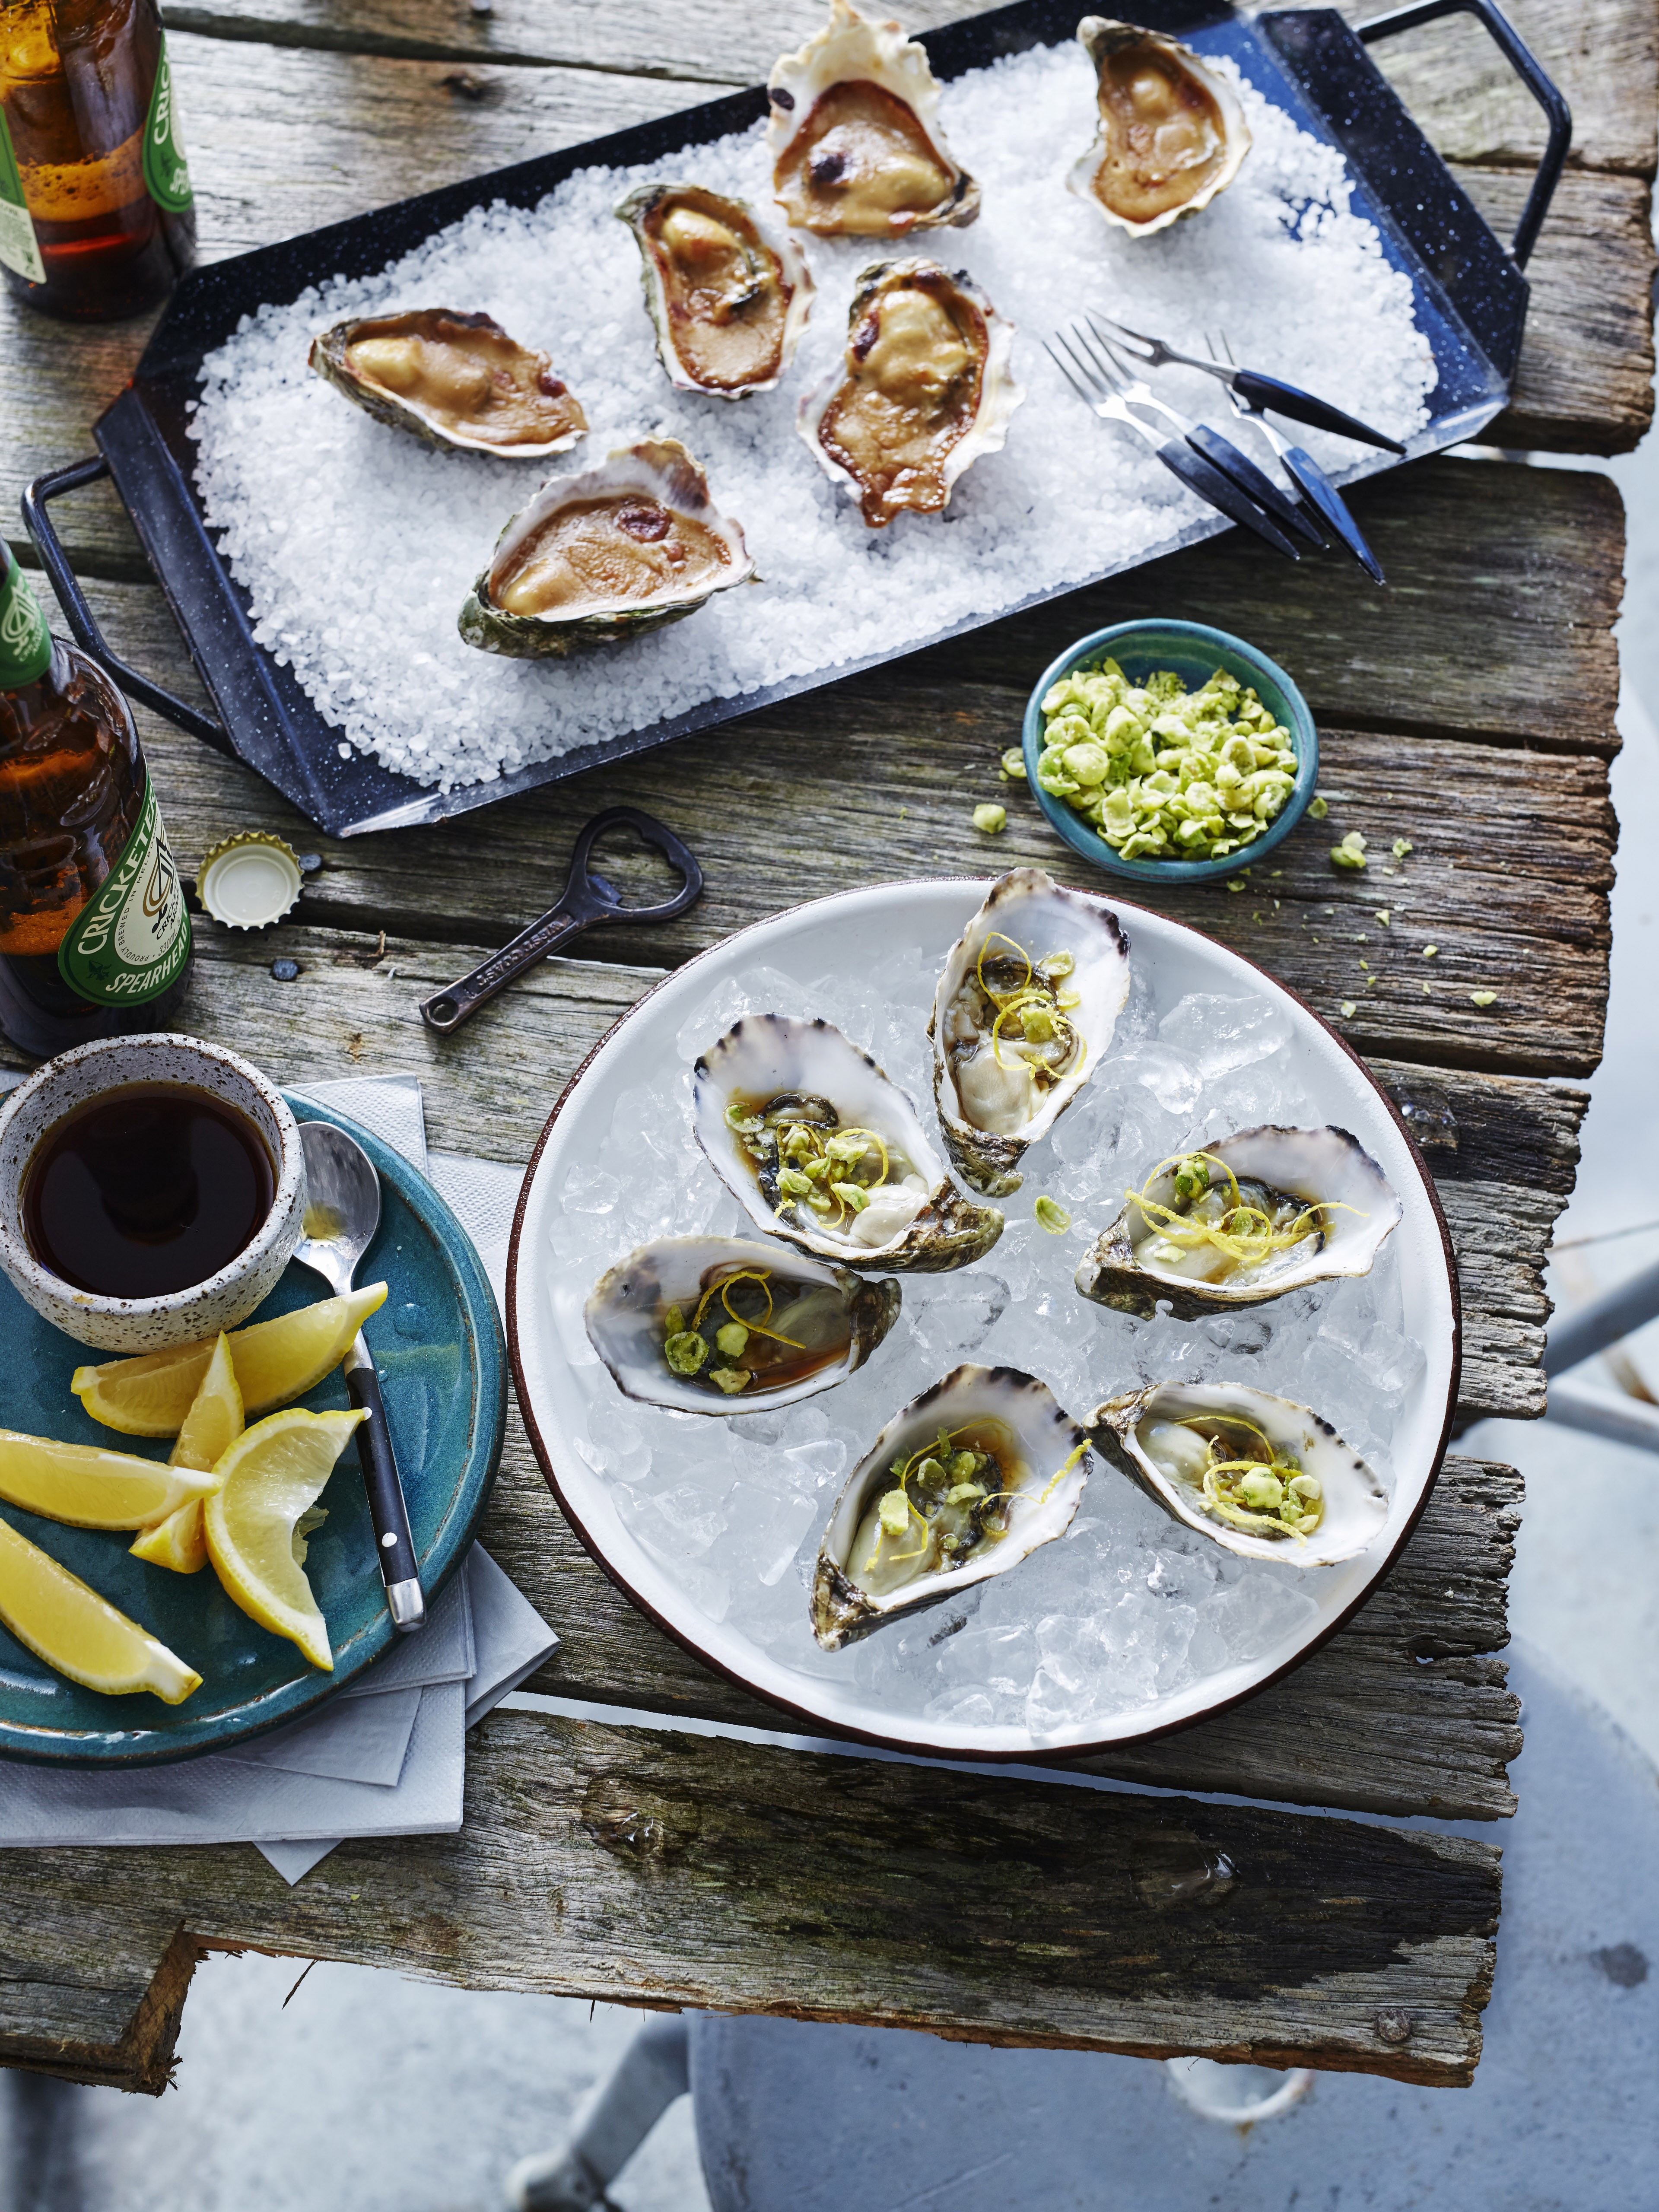 Oysters two ways: Image from Kitchen Mojo by Paul Mercurio, published by Murdoch Books